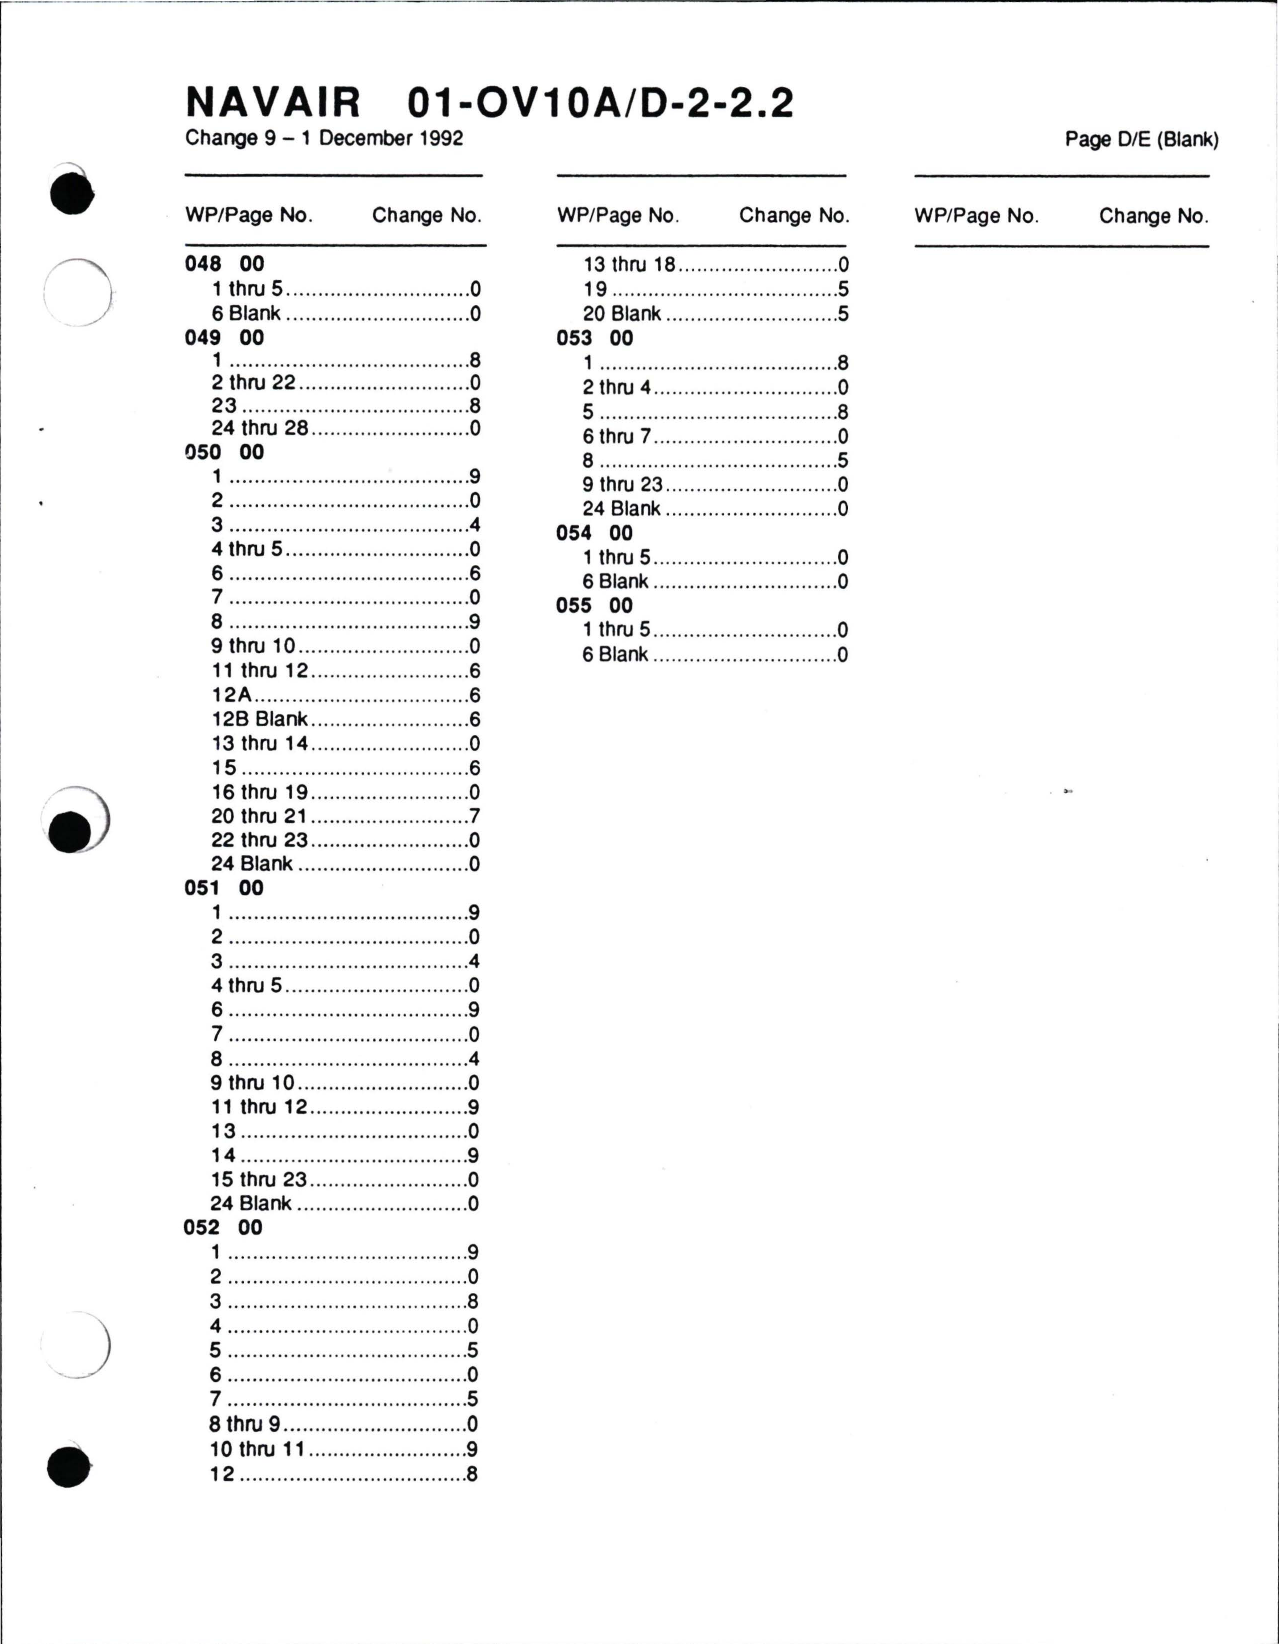 Sample page 5 from AirCorps Library document: Organizational Maintenance with Illustrated Parts Breakdown for Flight Control Systems for OV-10A/D